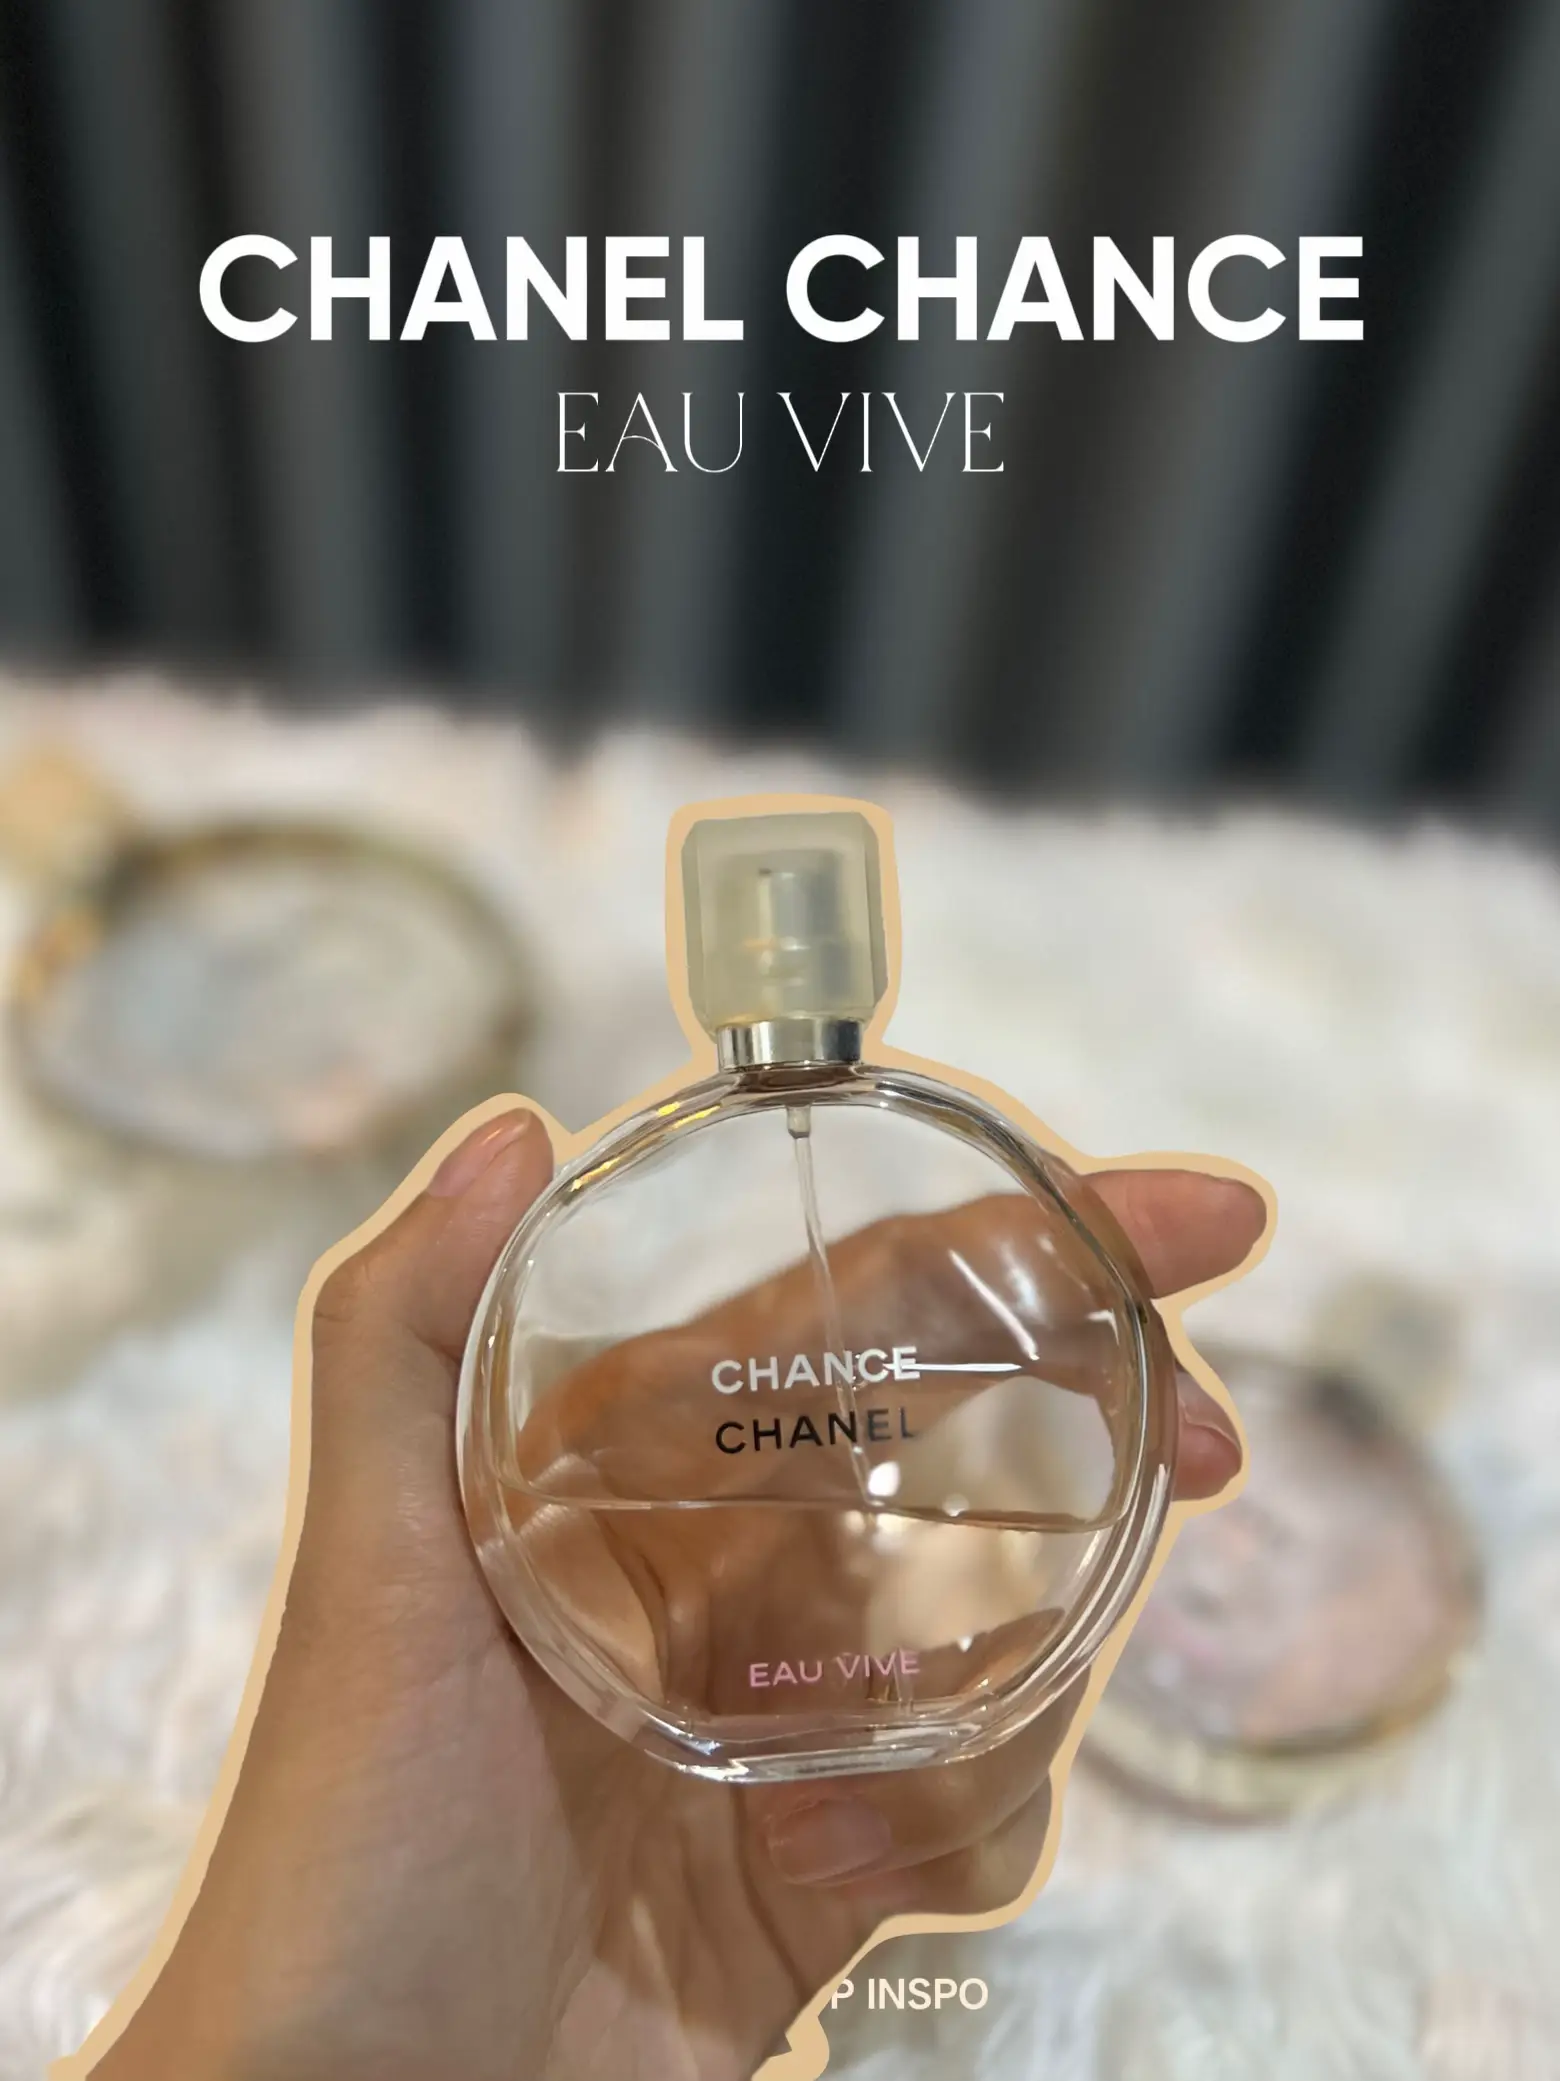 Chanel Chance Eau Vive Impression and Review